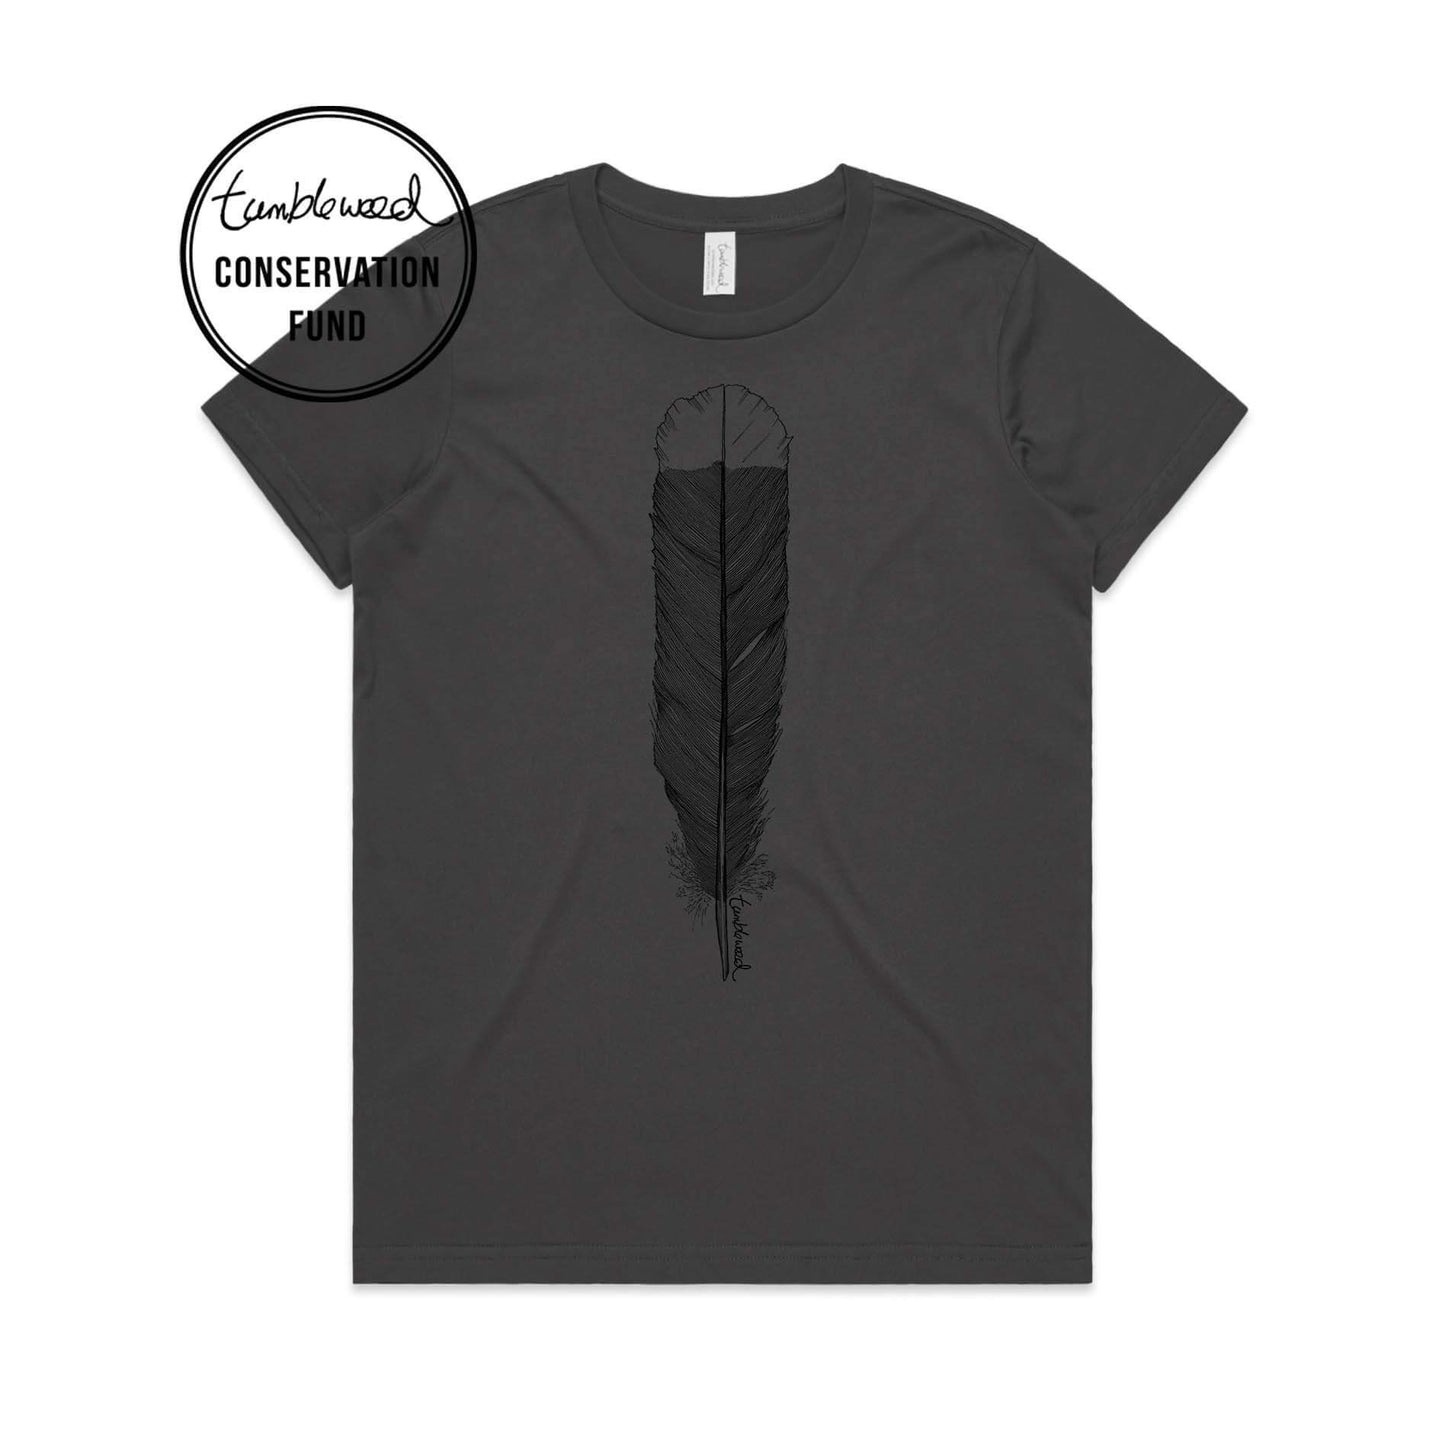 Charcoal, female t-shirt featuring a screen printed huia feather design.